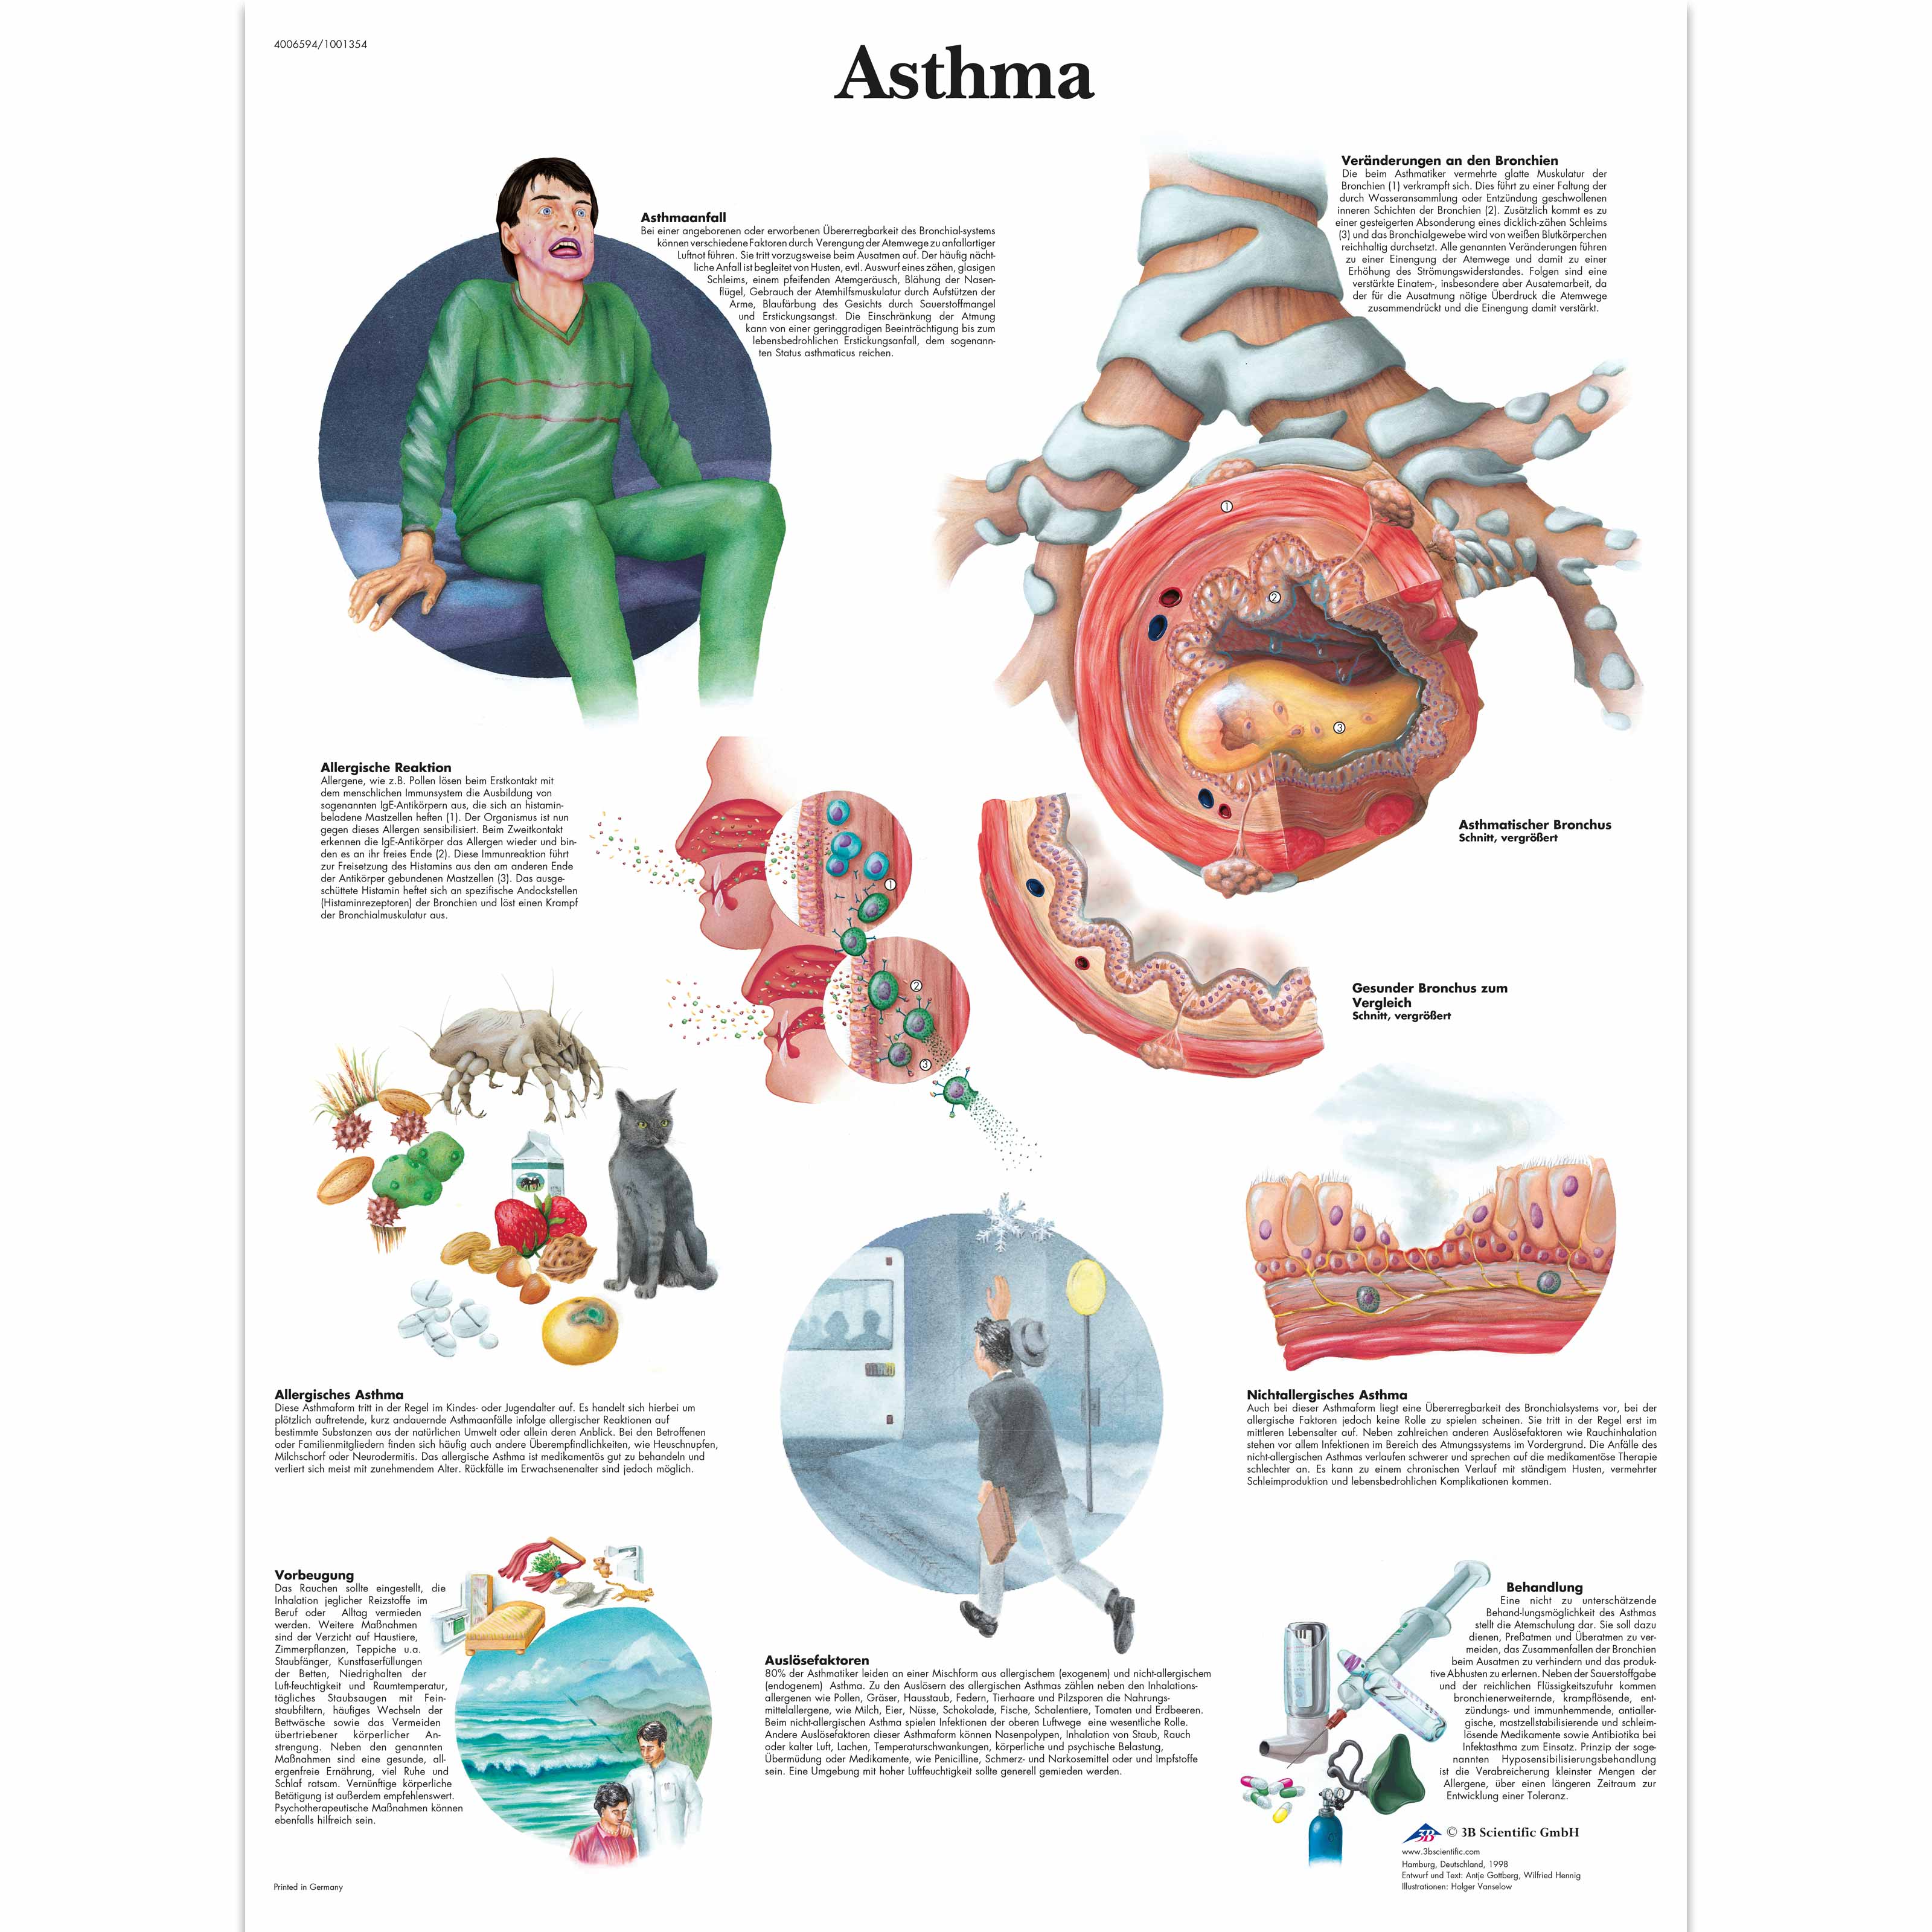 Asthma Chart 1001354 3b Scientific Vr0328l Asthma Patient Education Asthma Models Asthma Charts And Posters Allergies Patient Education Allergies Charts And Posters